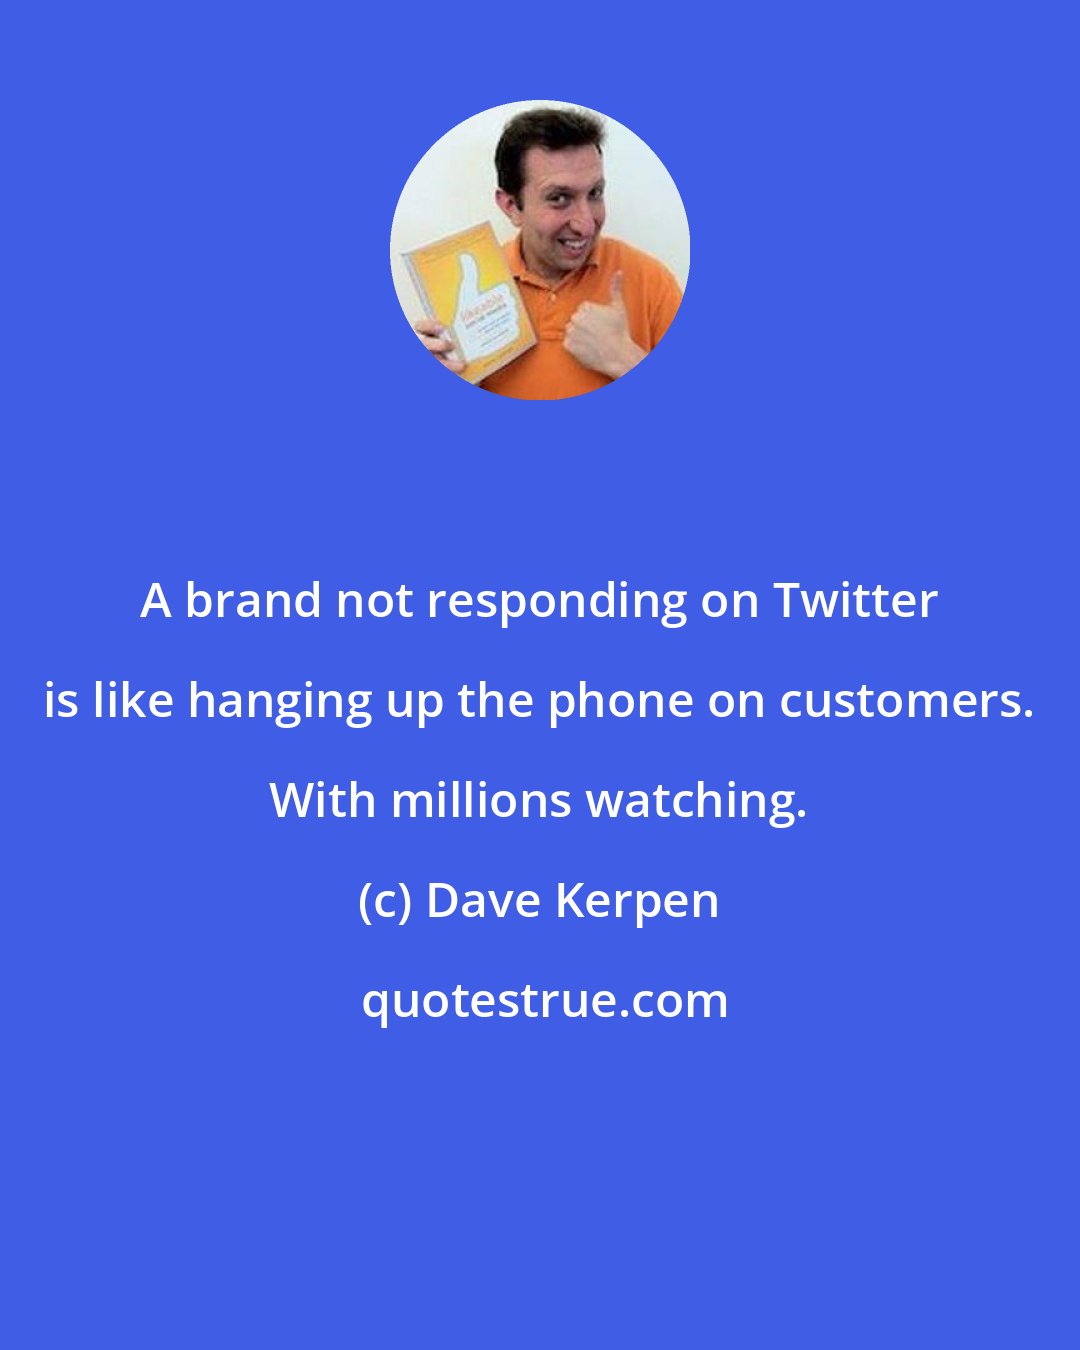 Dave Kerpen: A brand not responding on Twitter is like hanging up the phone on customers. With millions watching.